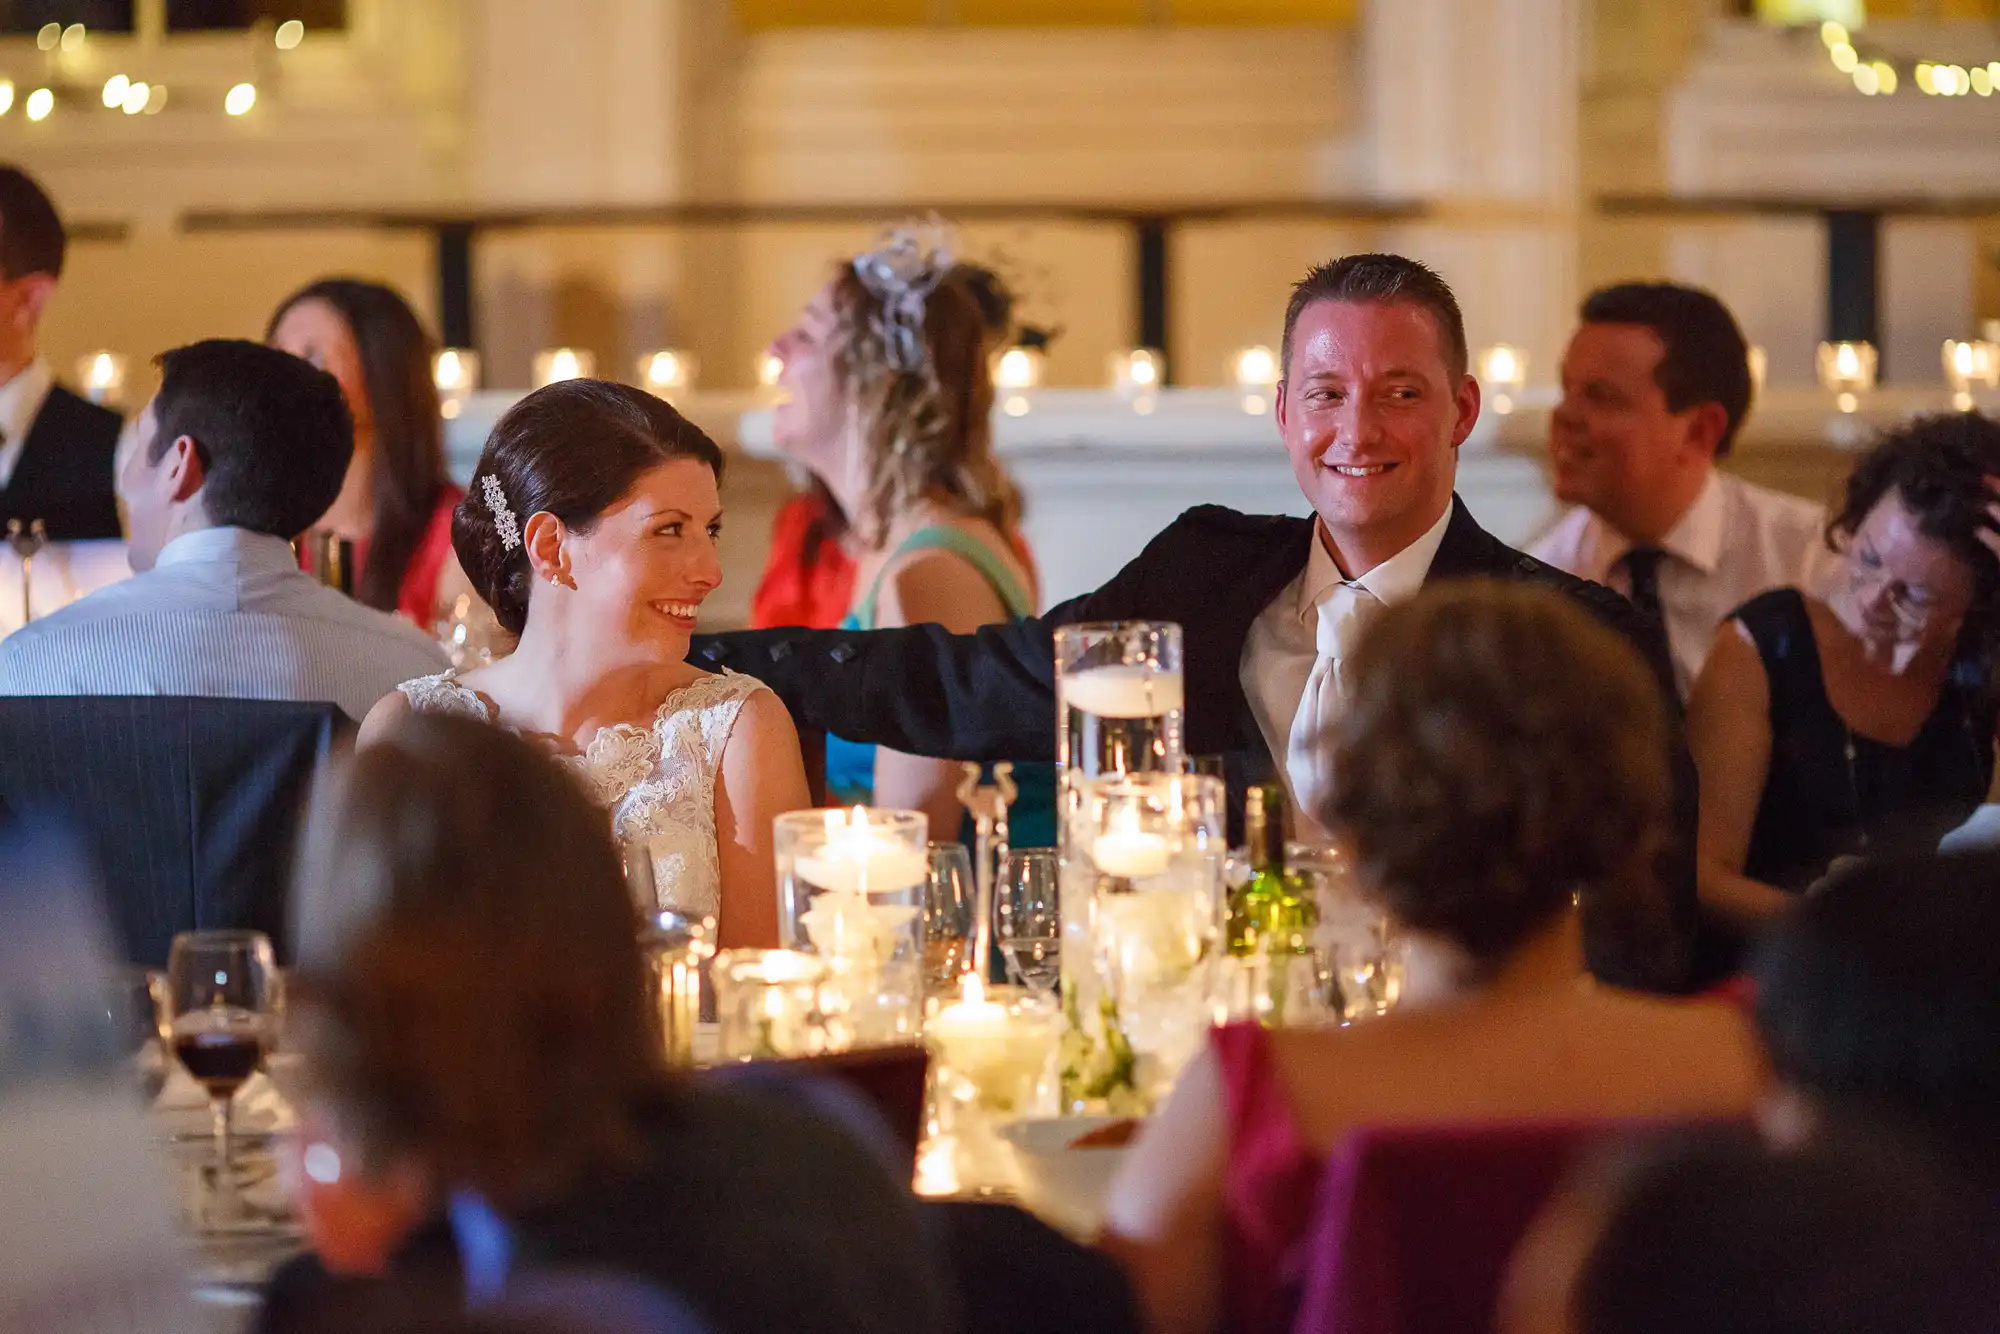 A bride and groom smiling and interacting with guests at a wedding reception dinner.